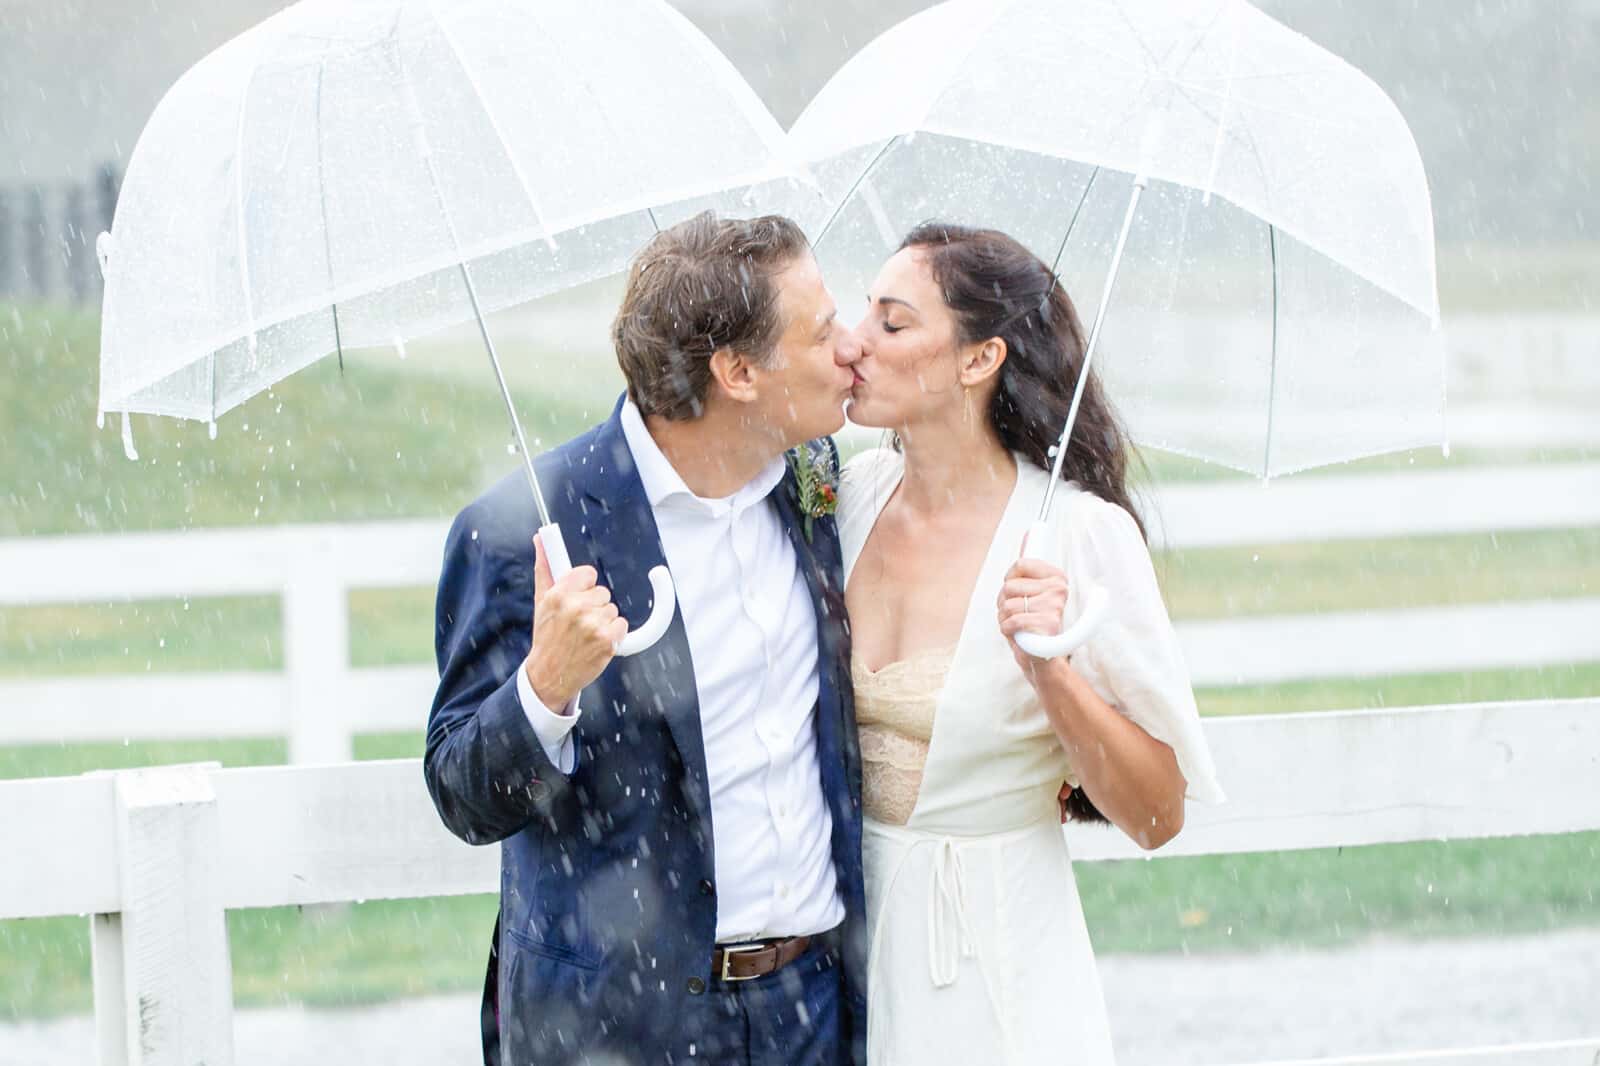 Elopement bride and groom stand under umbrellas kissing outside in pouring rain.